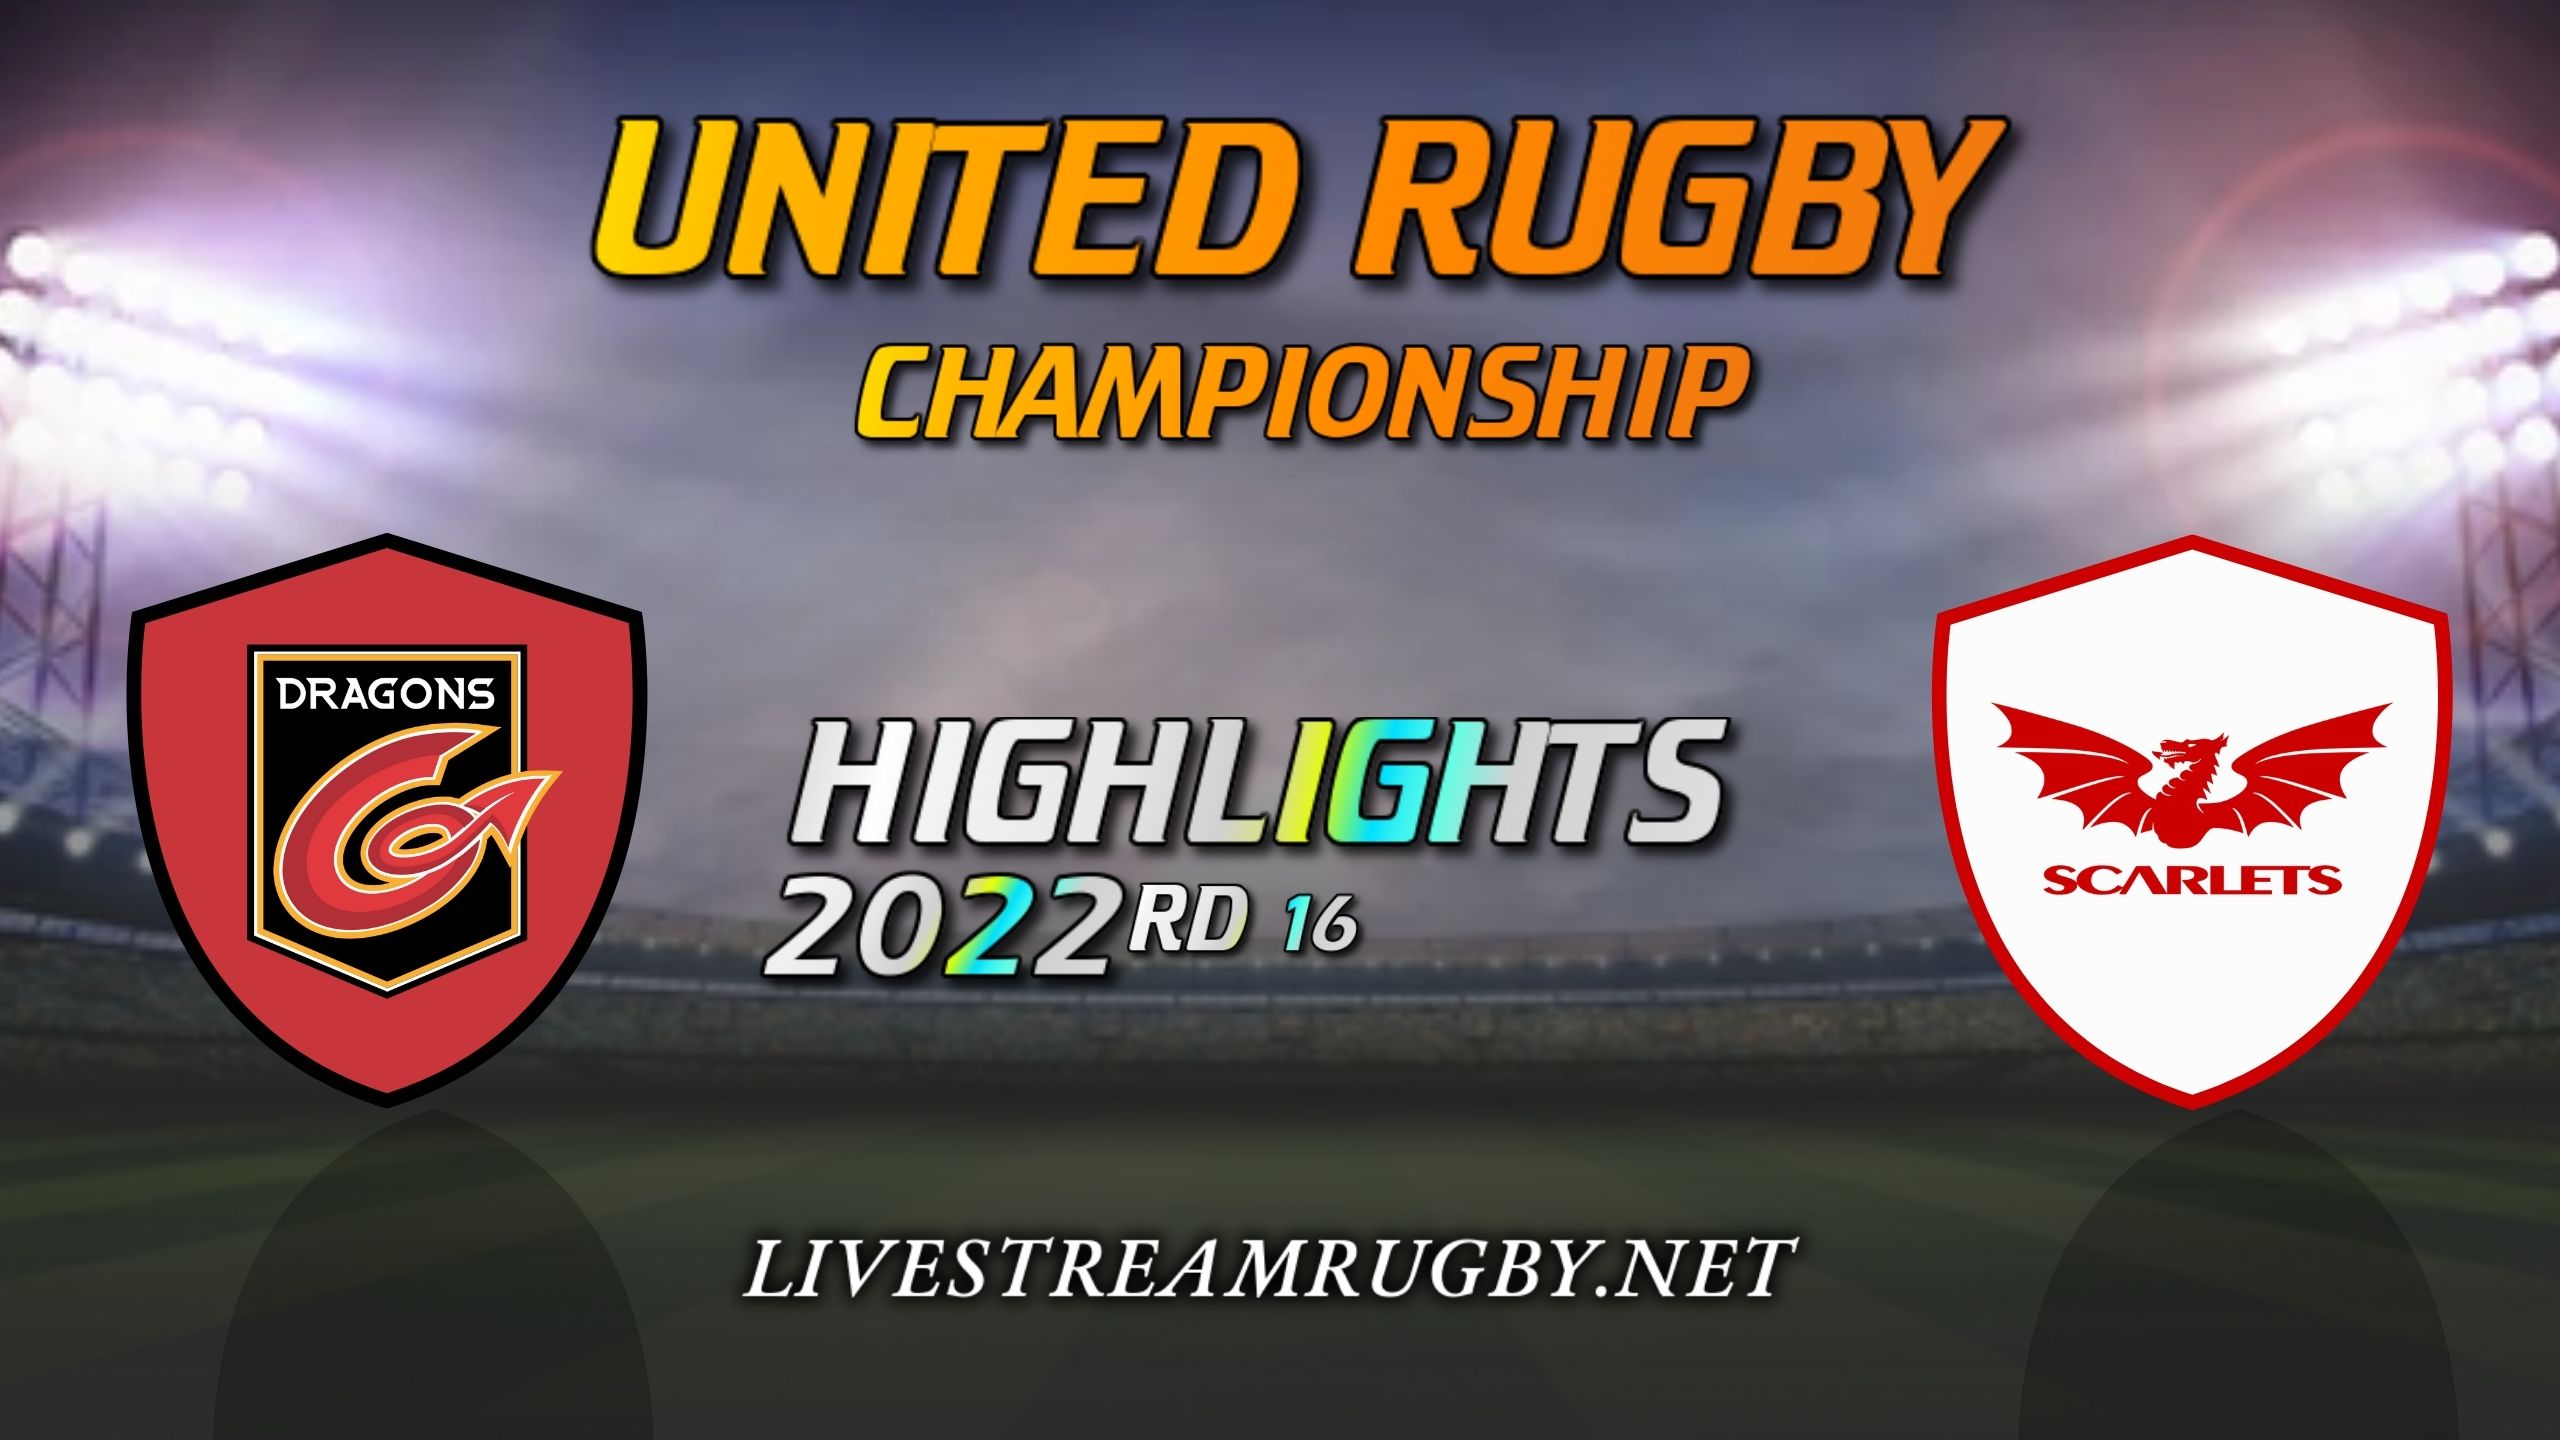 Dragons Vs Scarlets Highlights 2022 Rd 16 United Rugby